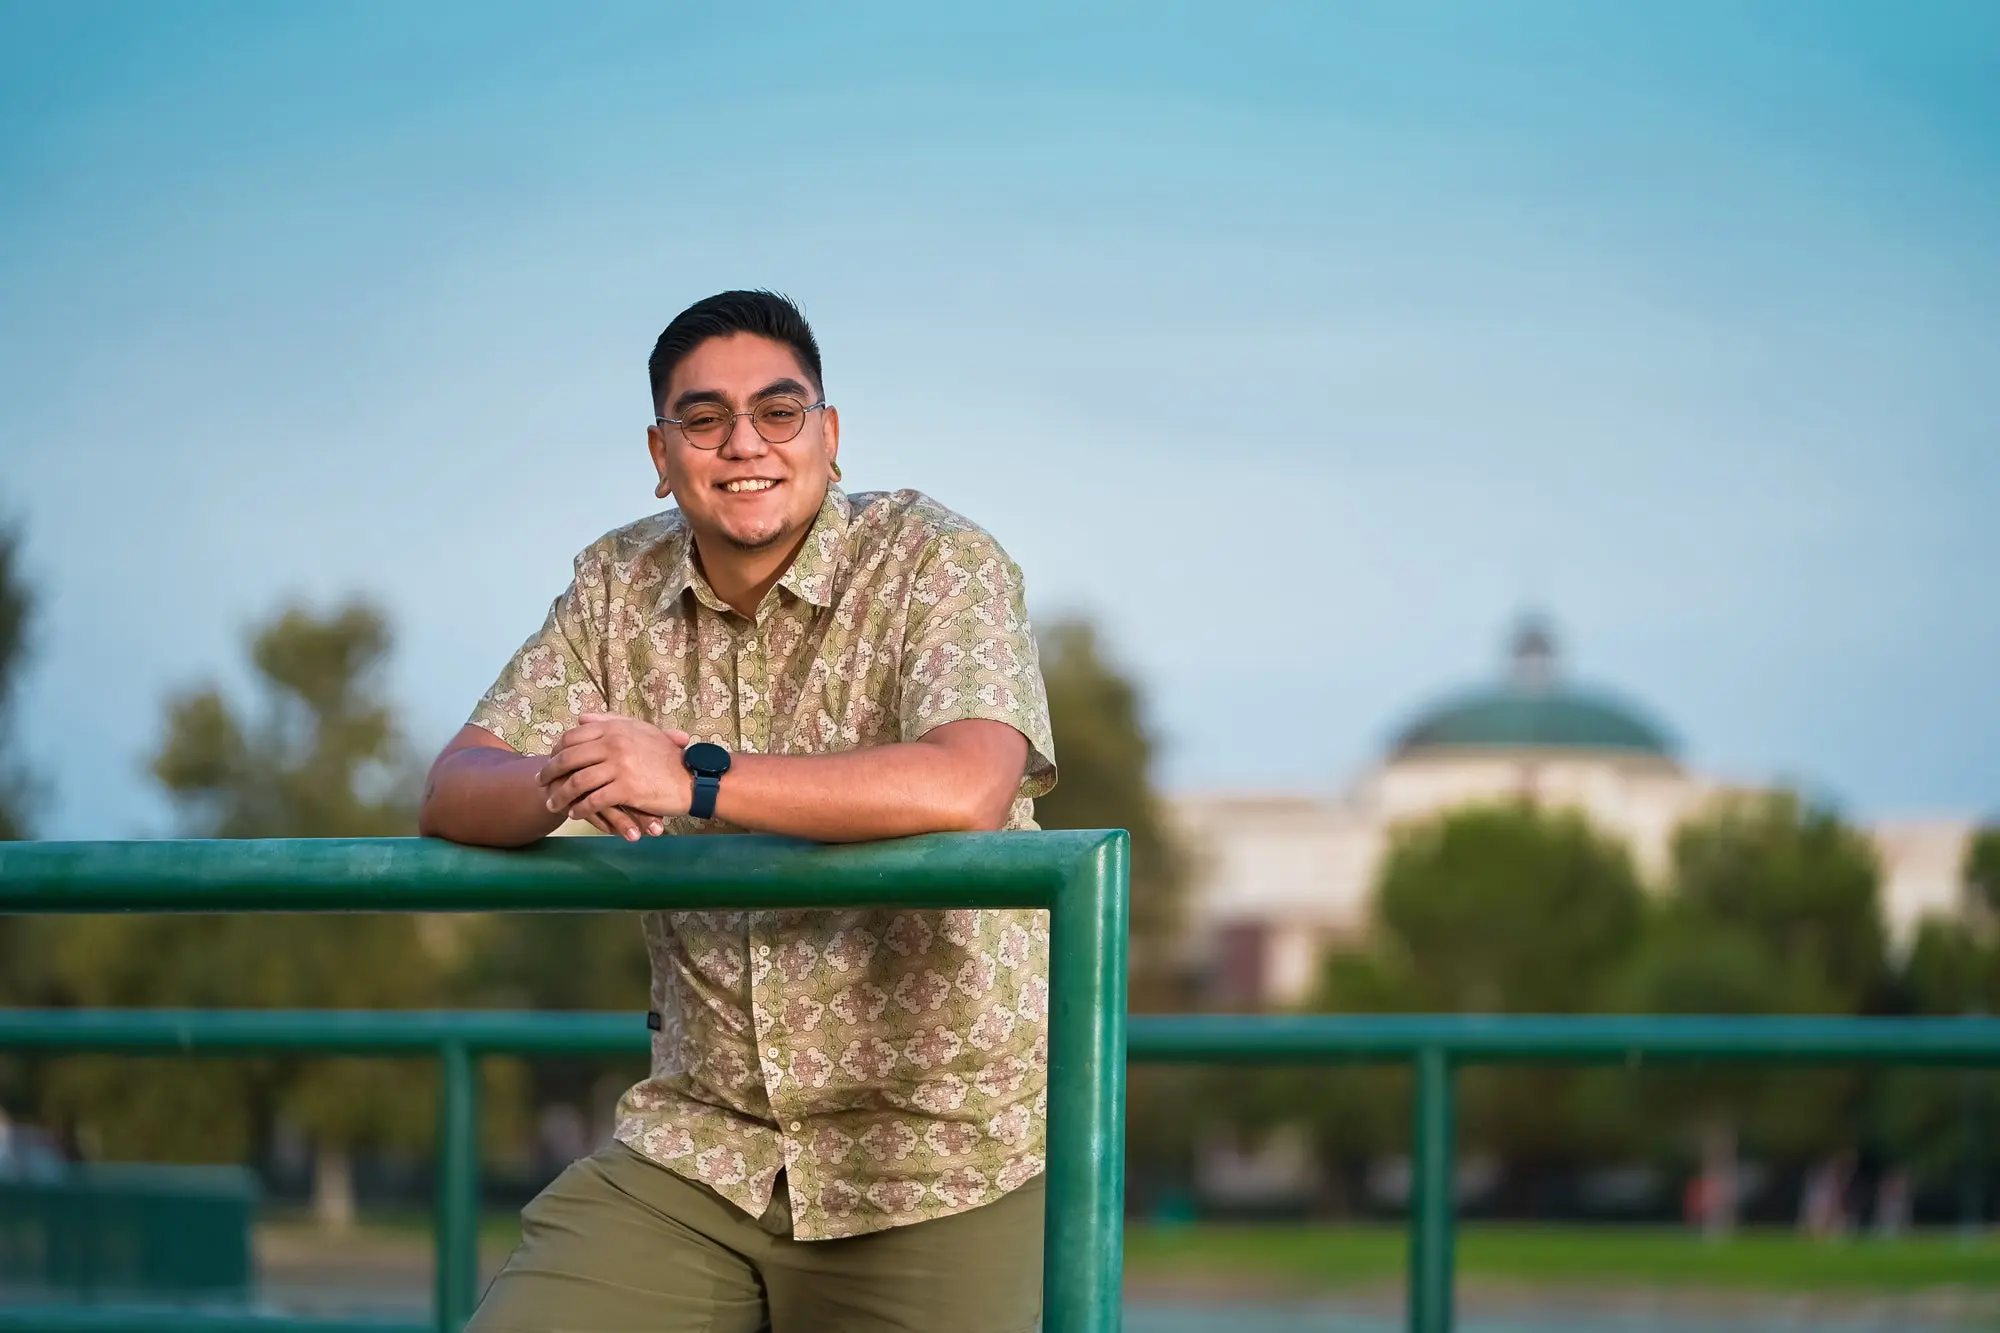 Learning new ways of thinking: Software Engineer Intern Raul Trejo shares his experiences at Adobe.